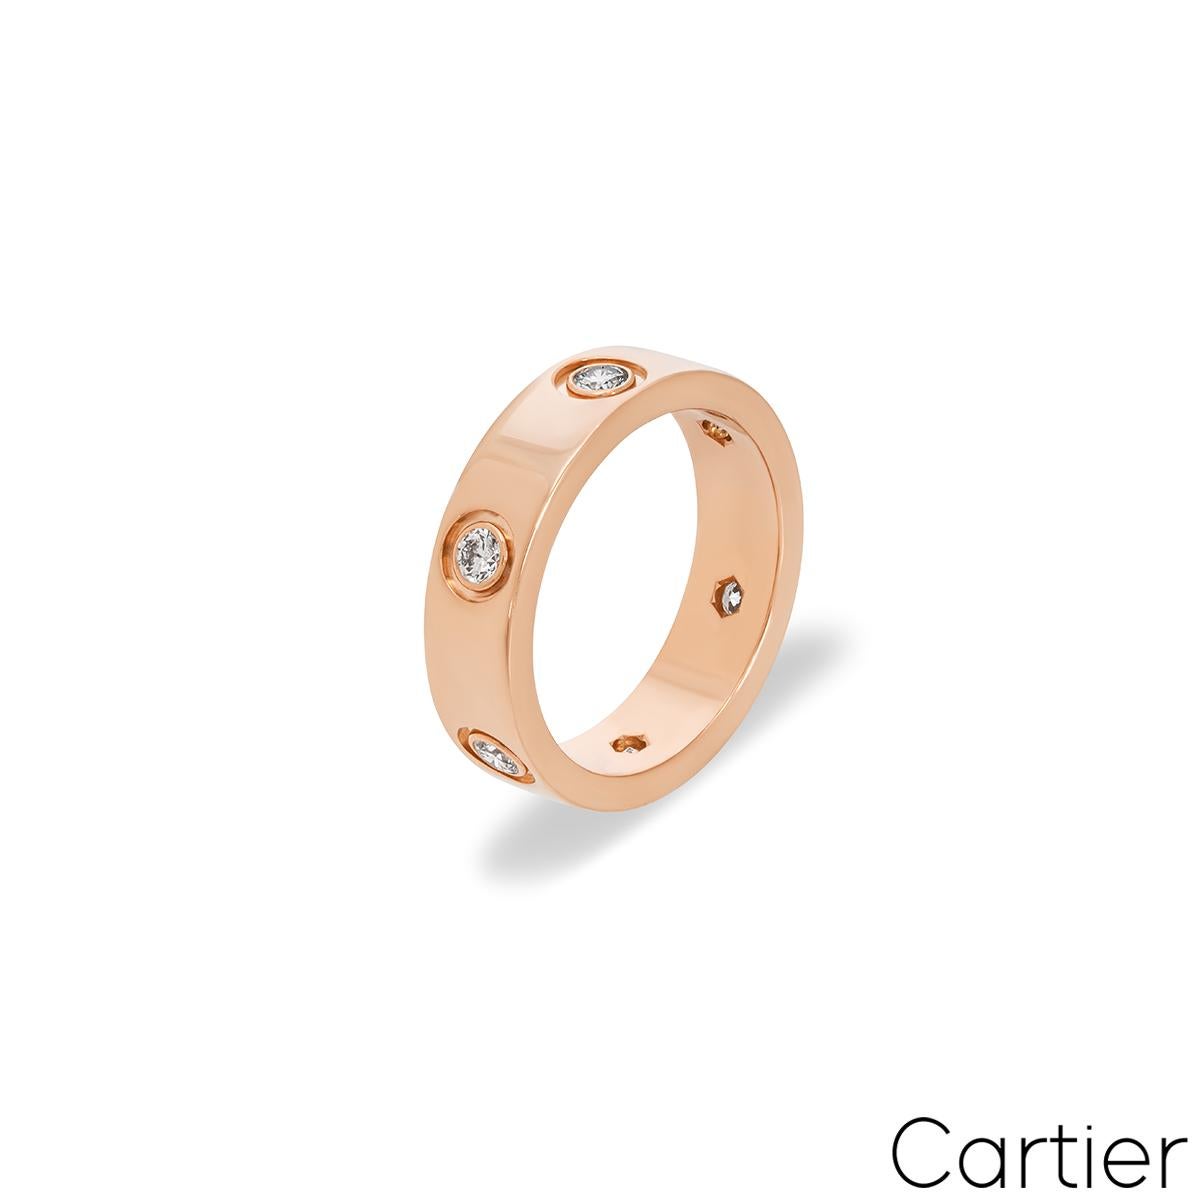 An iconic 18k rose gold Cartier ring from the Love collection. The ring comprises of 6 round brilliant cut diamonds set throughout the centre of the band with an approximate total weight of 0.46ct, F-G colour and VS clarity. It measures 5.5mm in